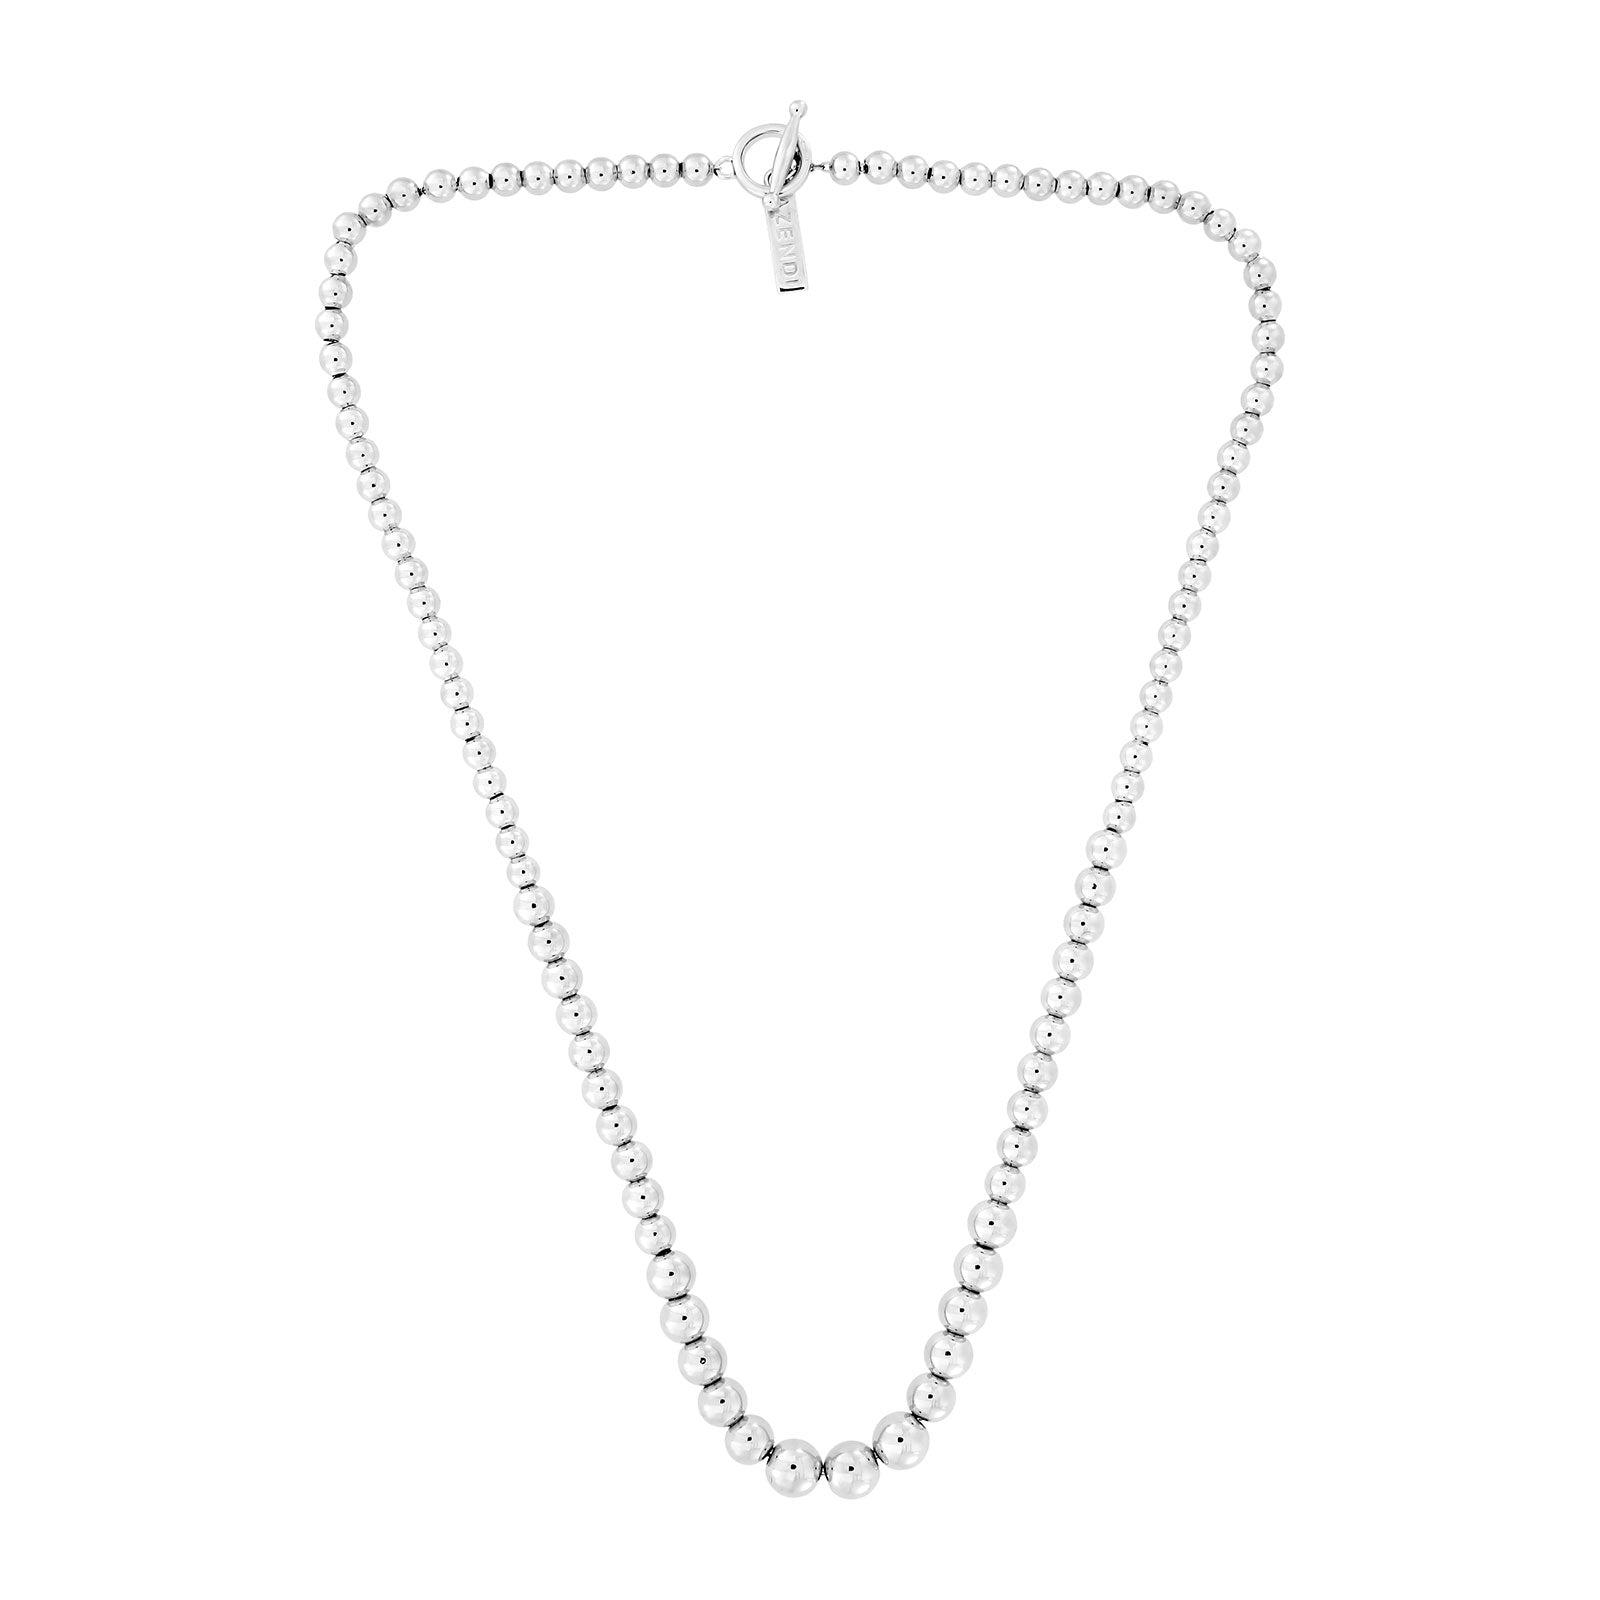 Graduated Silver Bead Necklace with T-Bar